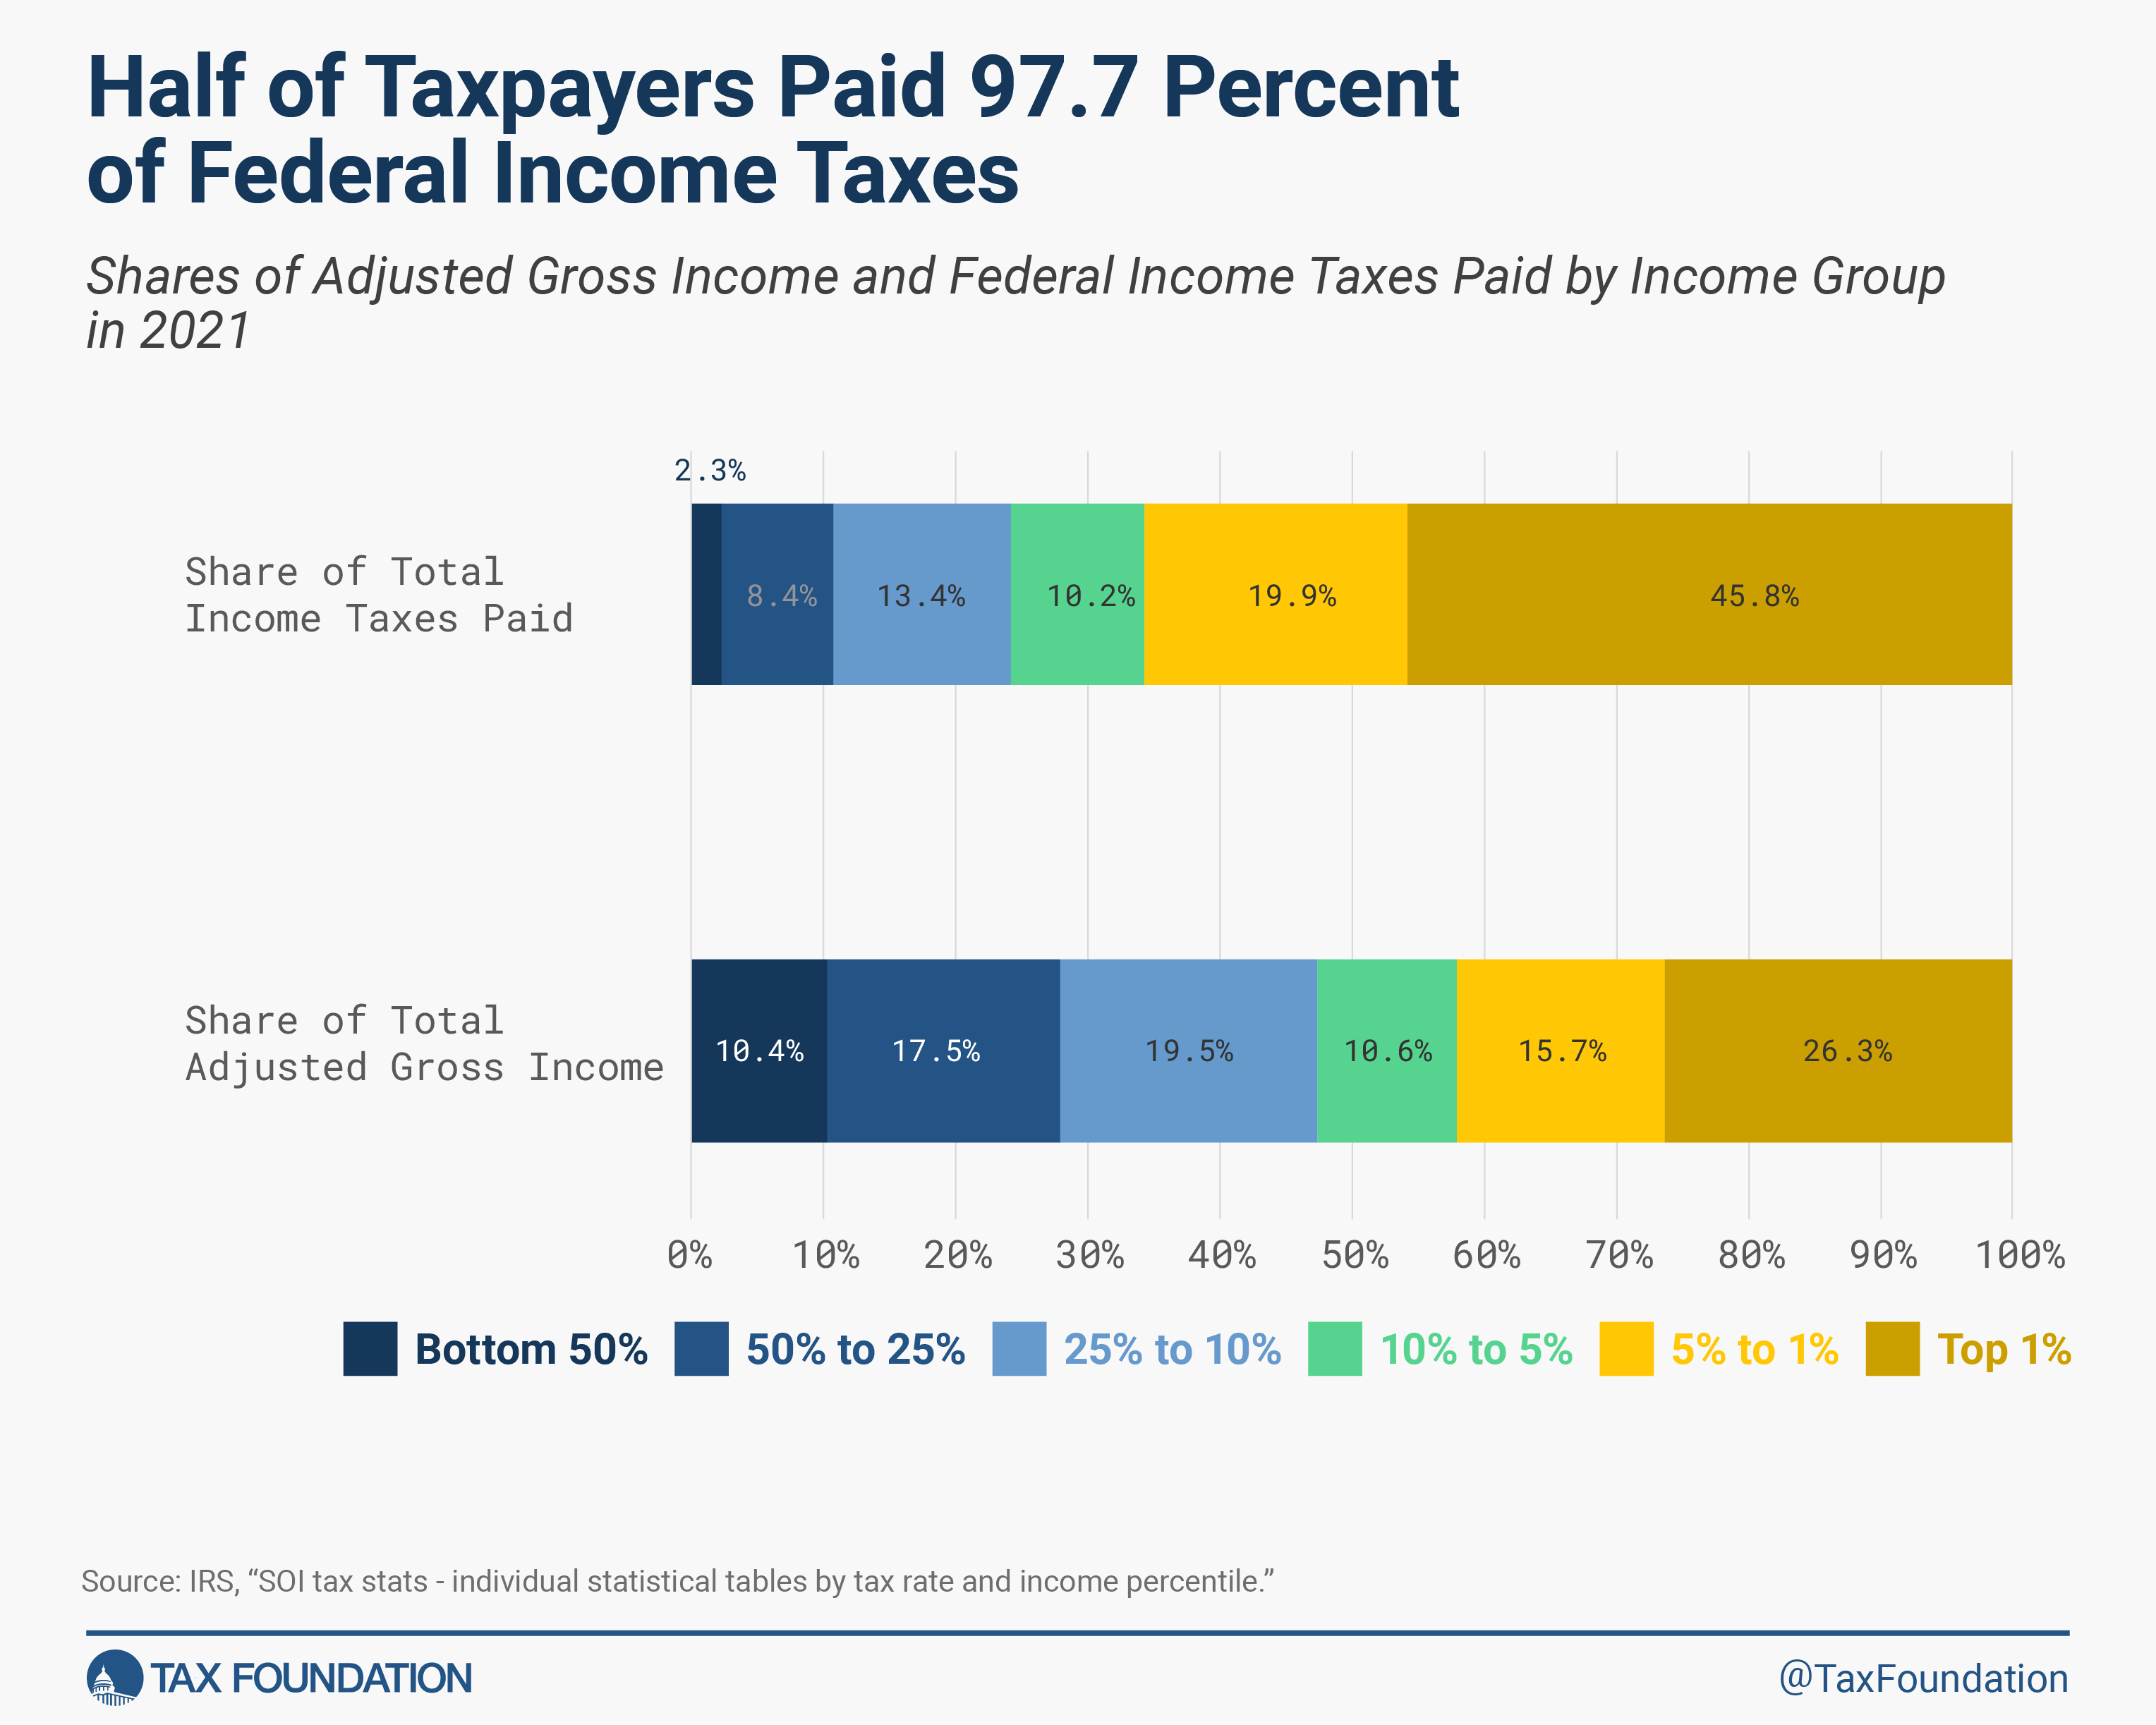 Half of taxpayers pay over 97 percent of federal income taxes, according to the latest federal income tax data